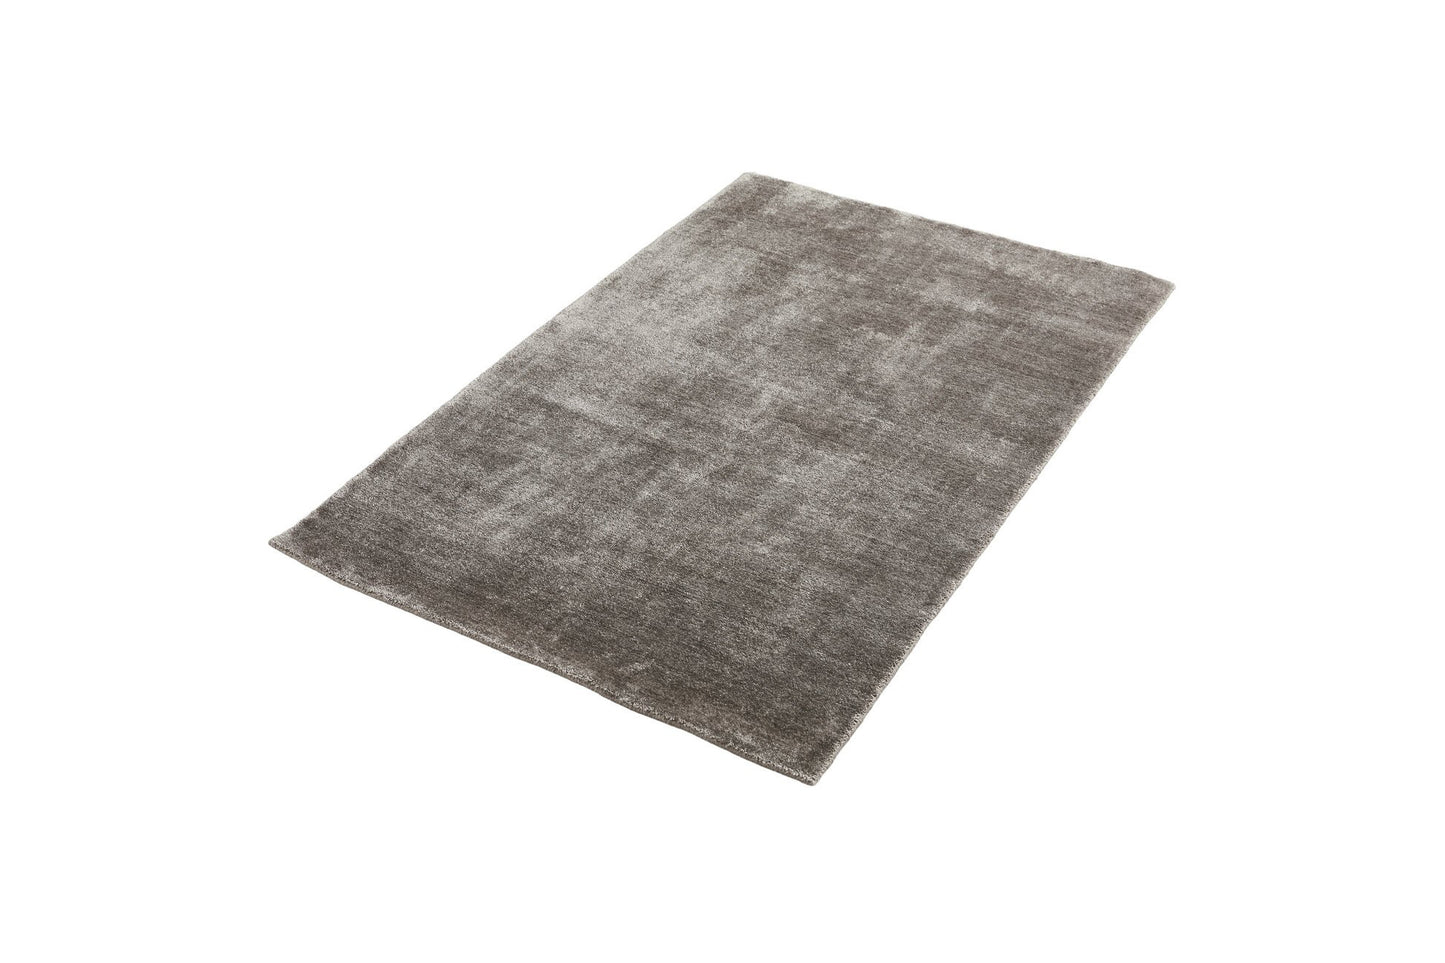 Tint Rug by Woud